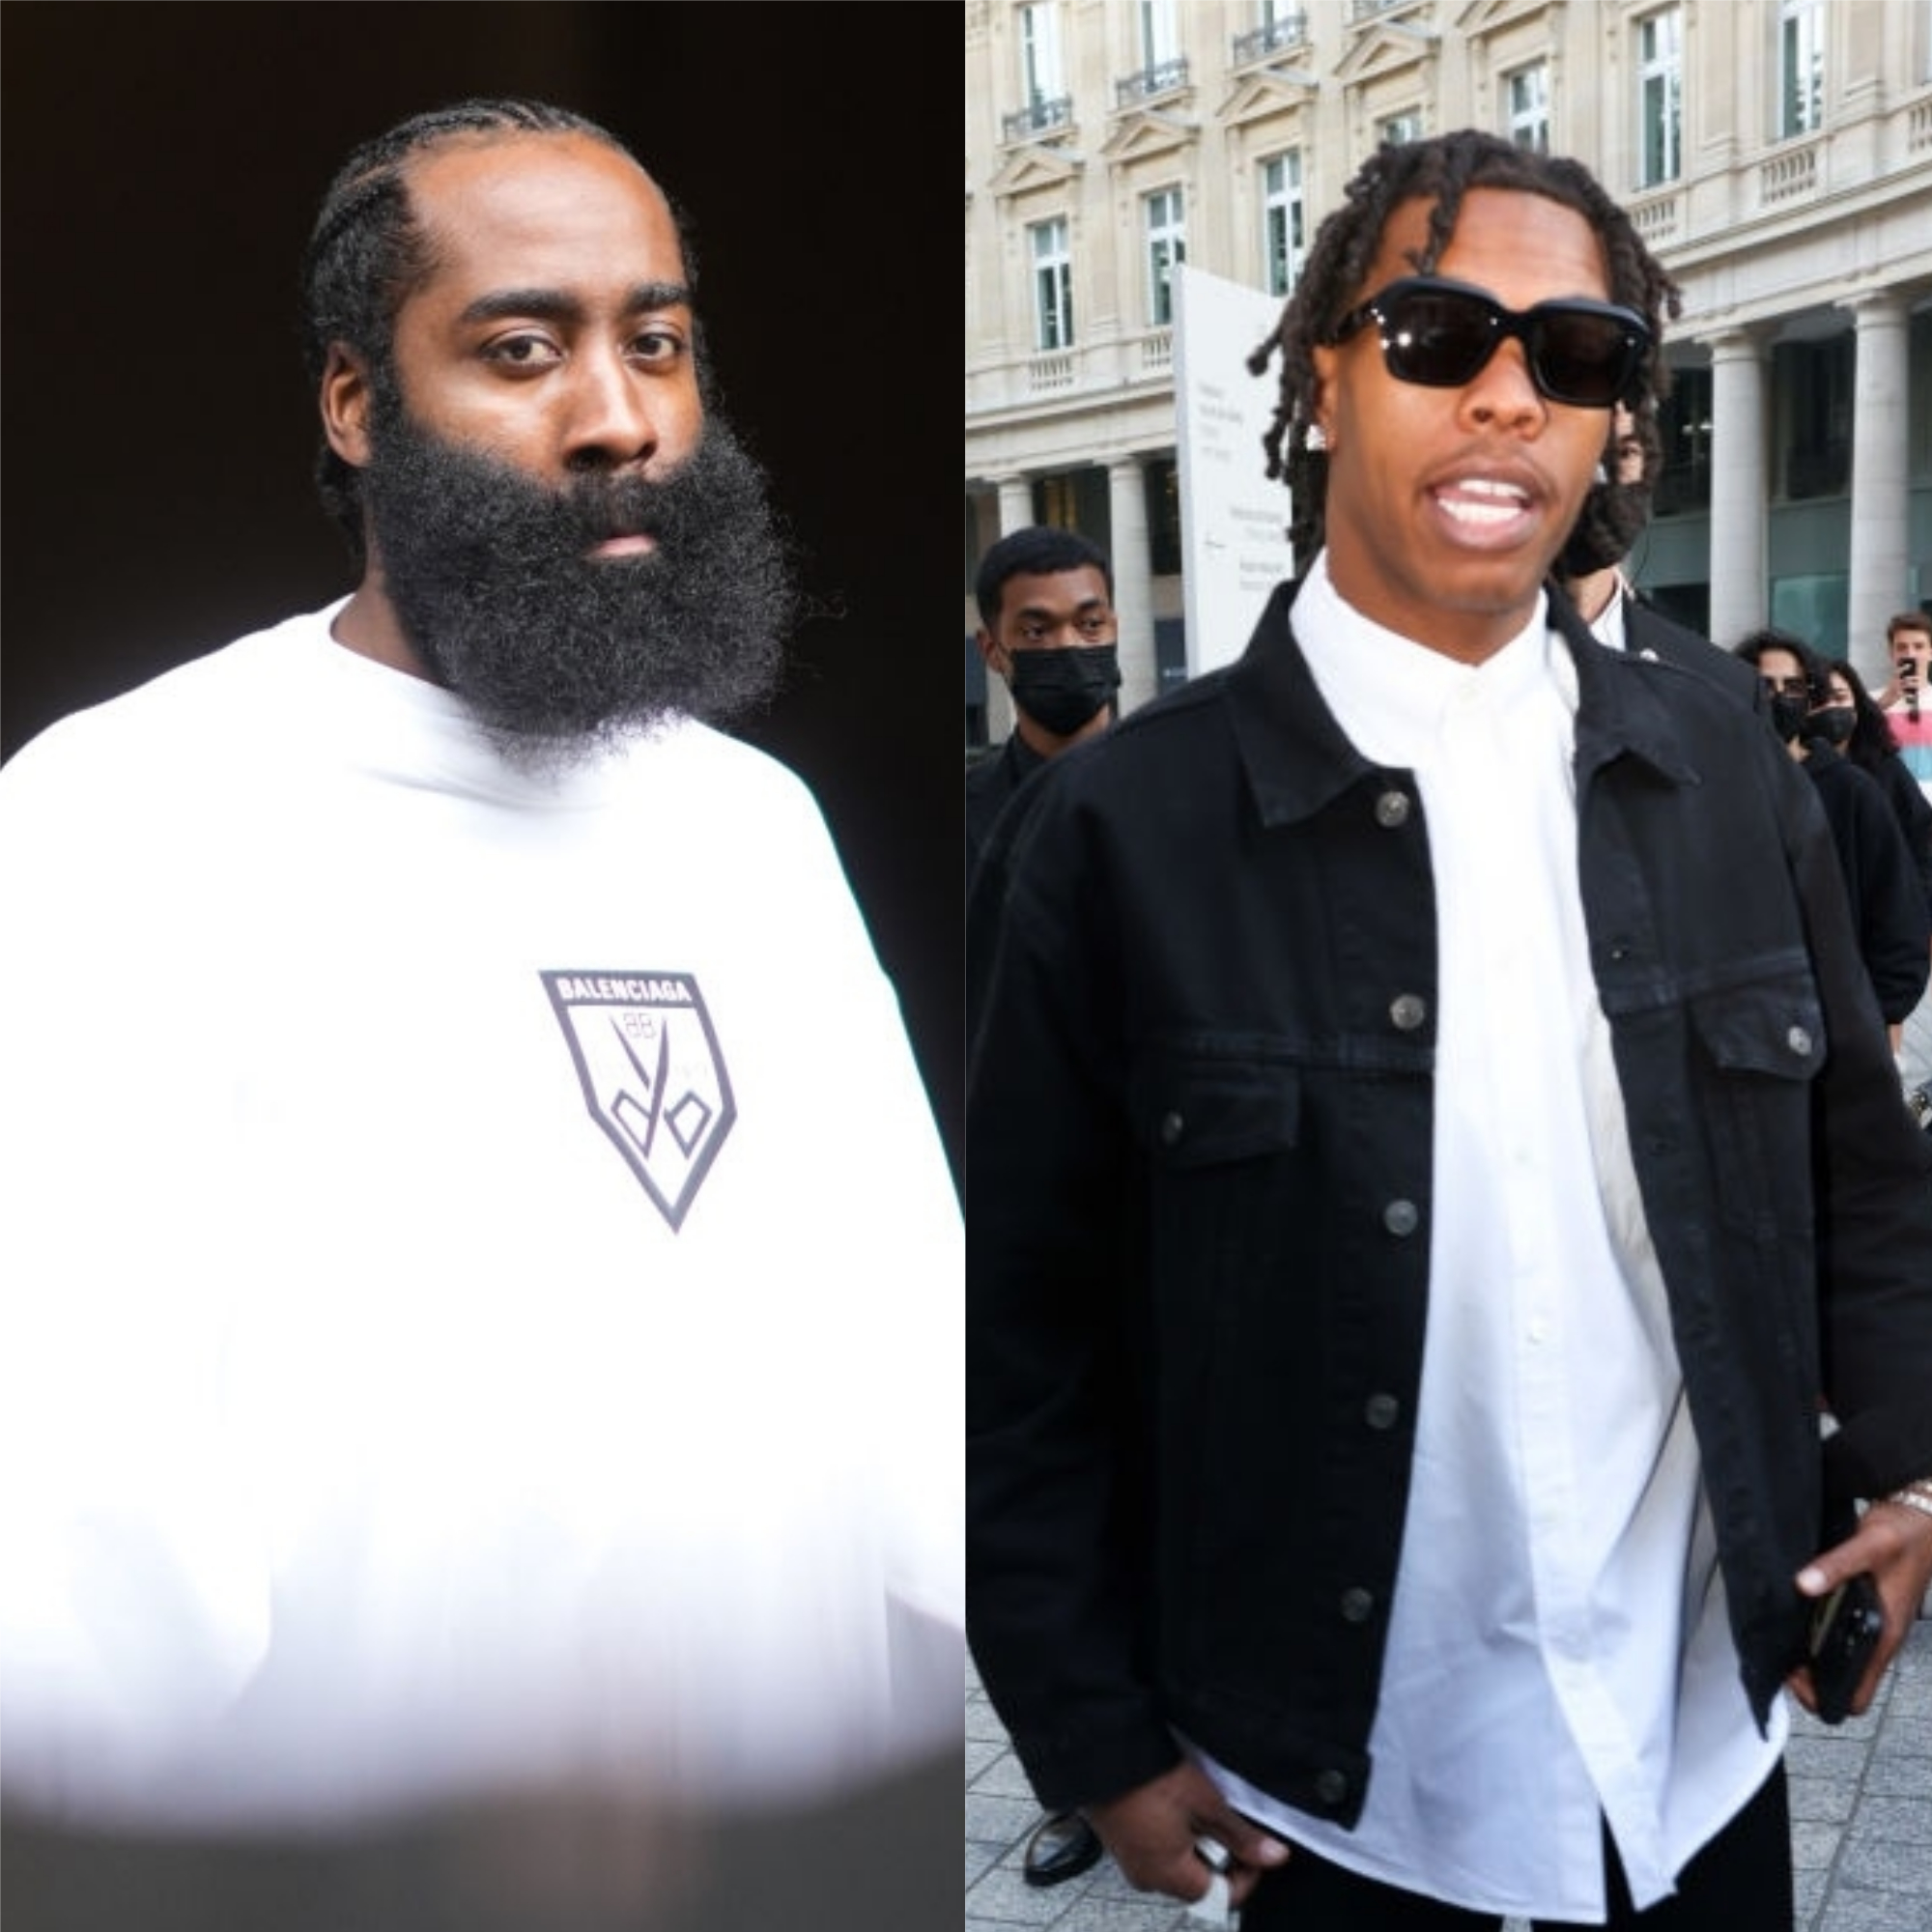 Houston Rockets: James Harden stopped by French police with Lil Baby